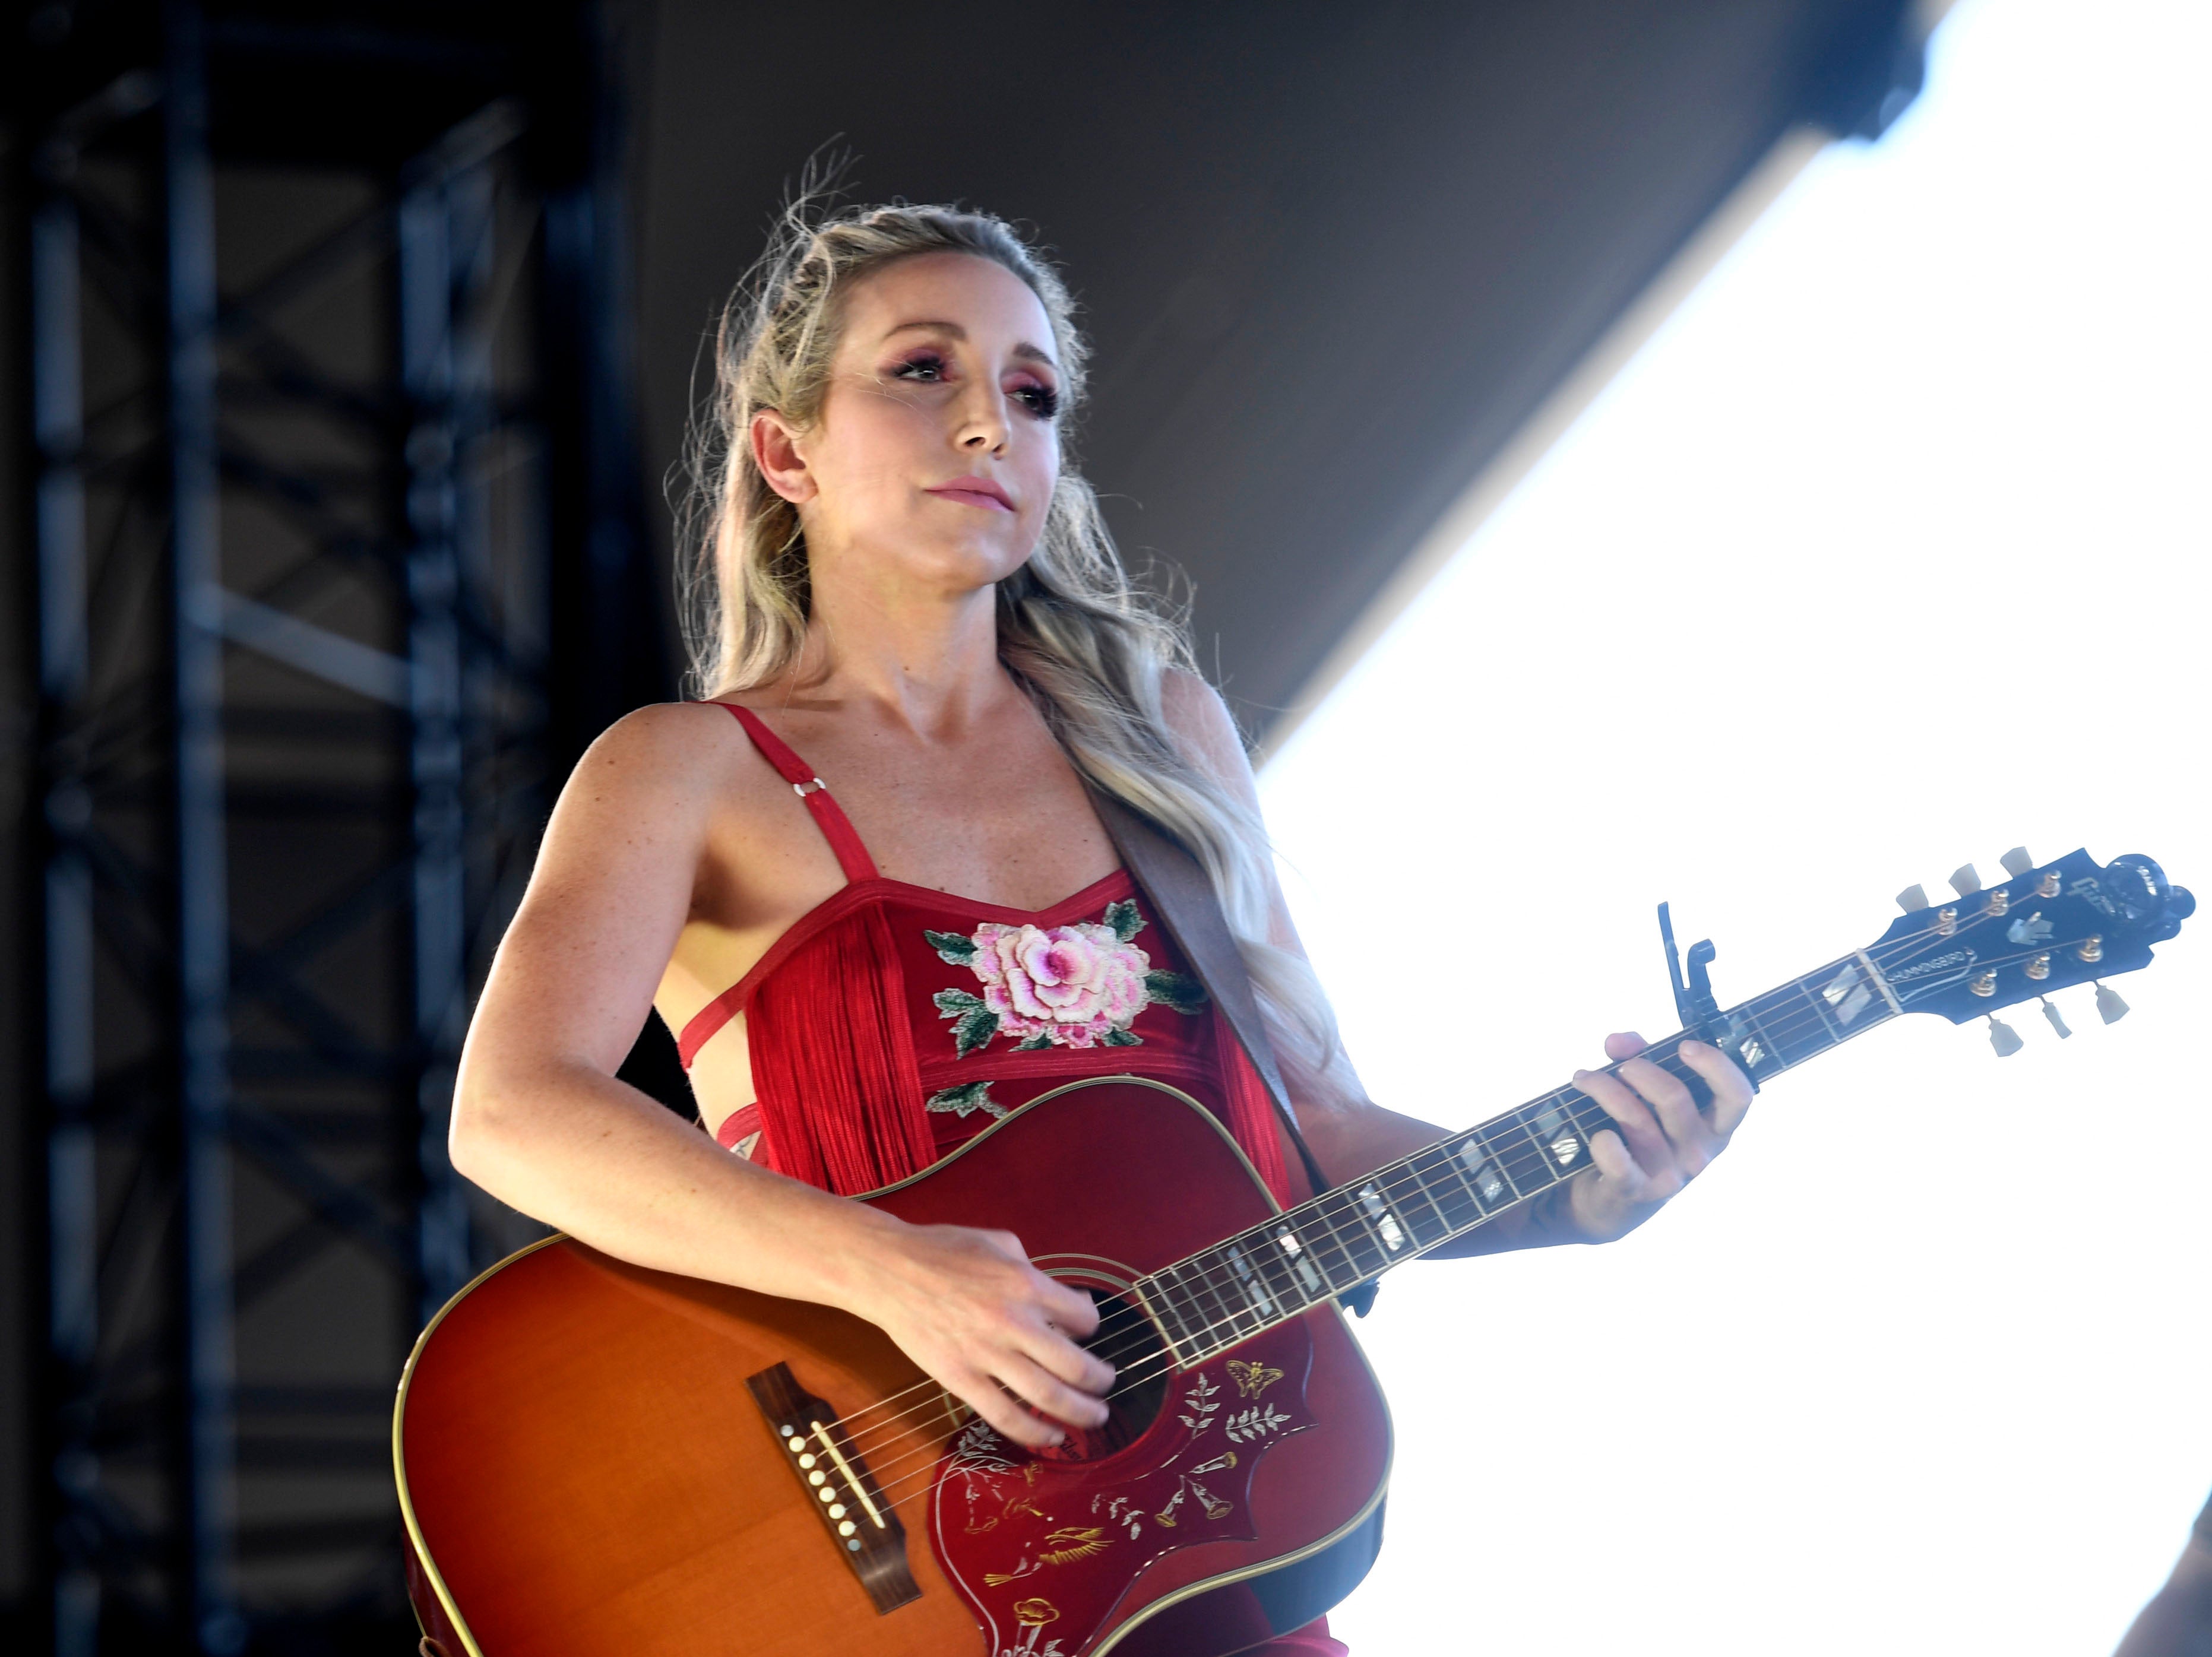 Ashley Monroe performing during the 2019 Stagecoach Festival